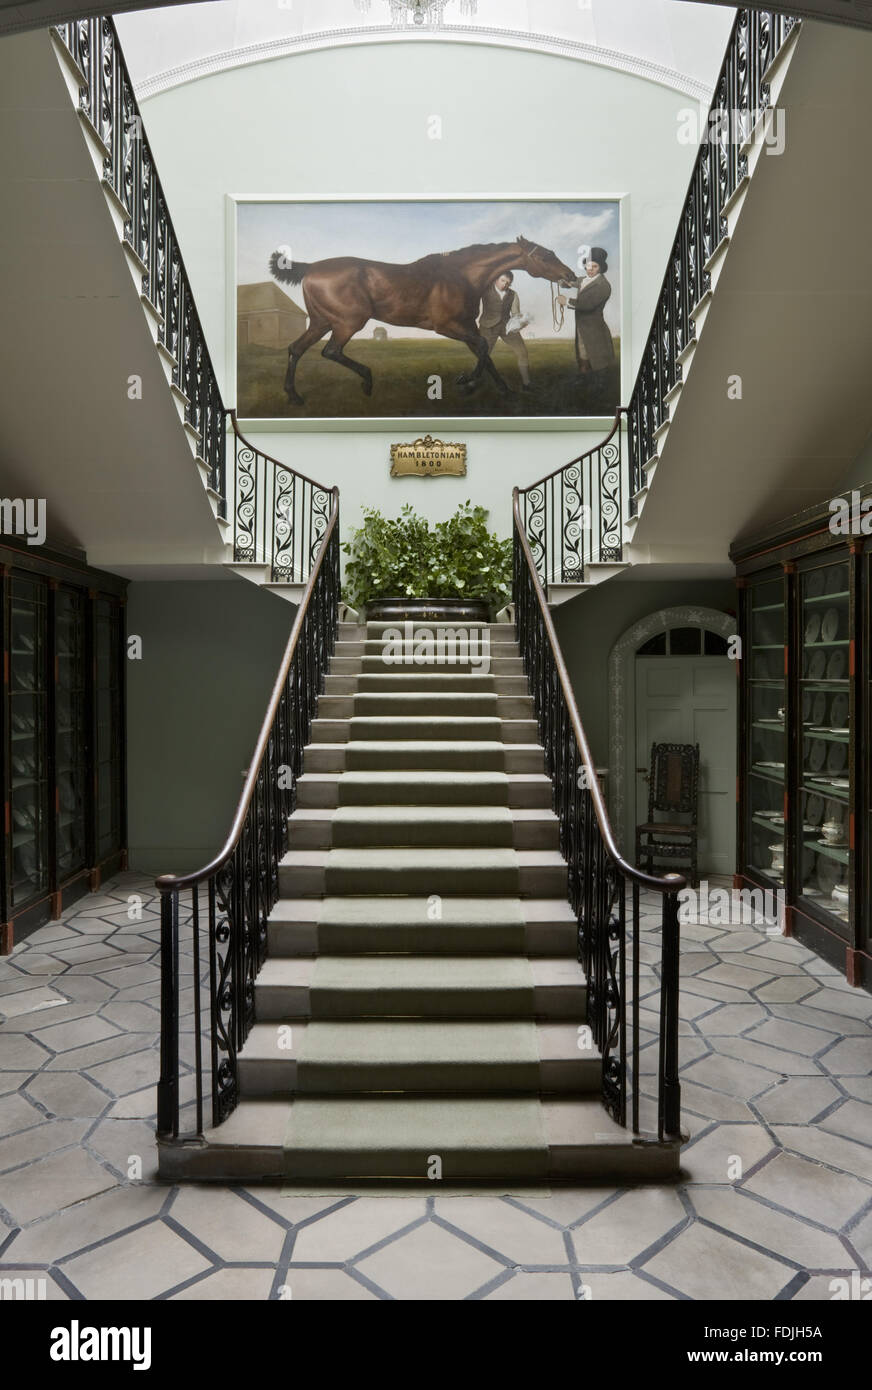 The Staircase, designed by George Dance, at Mount Stewart House, Co. Down, Northern Ireland. George Stubbs' famous painting of the racehorse Hambletonian hangs on the half-landing. Stock Photo